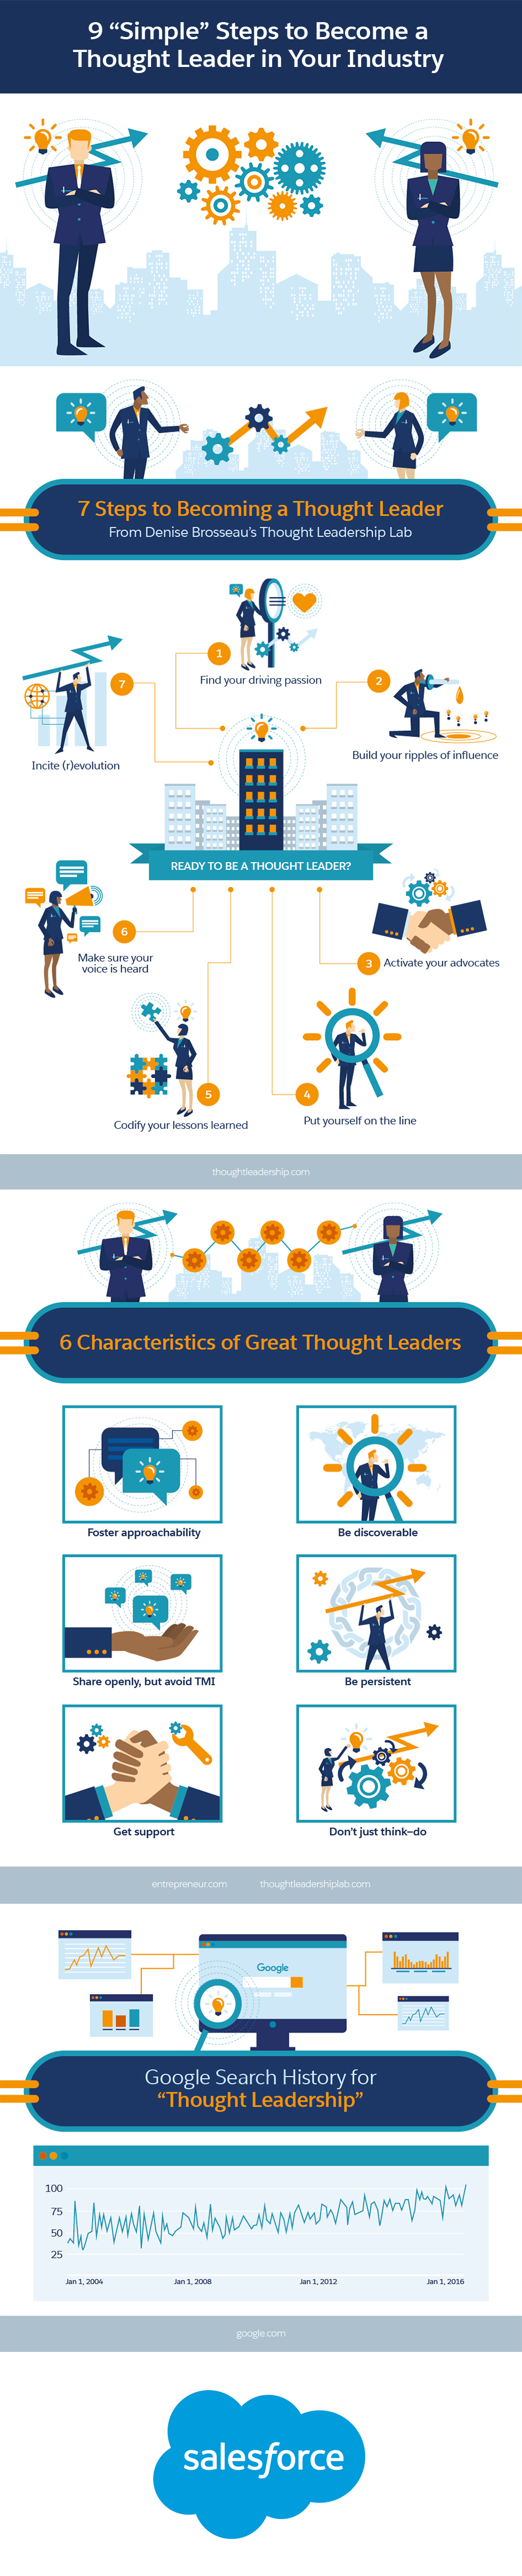 9 “Simple” Steps to Become a Thought Leader in Your Industry - Salesforce